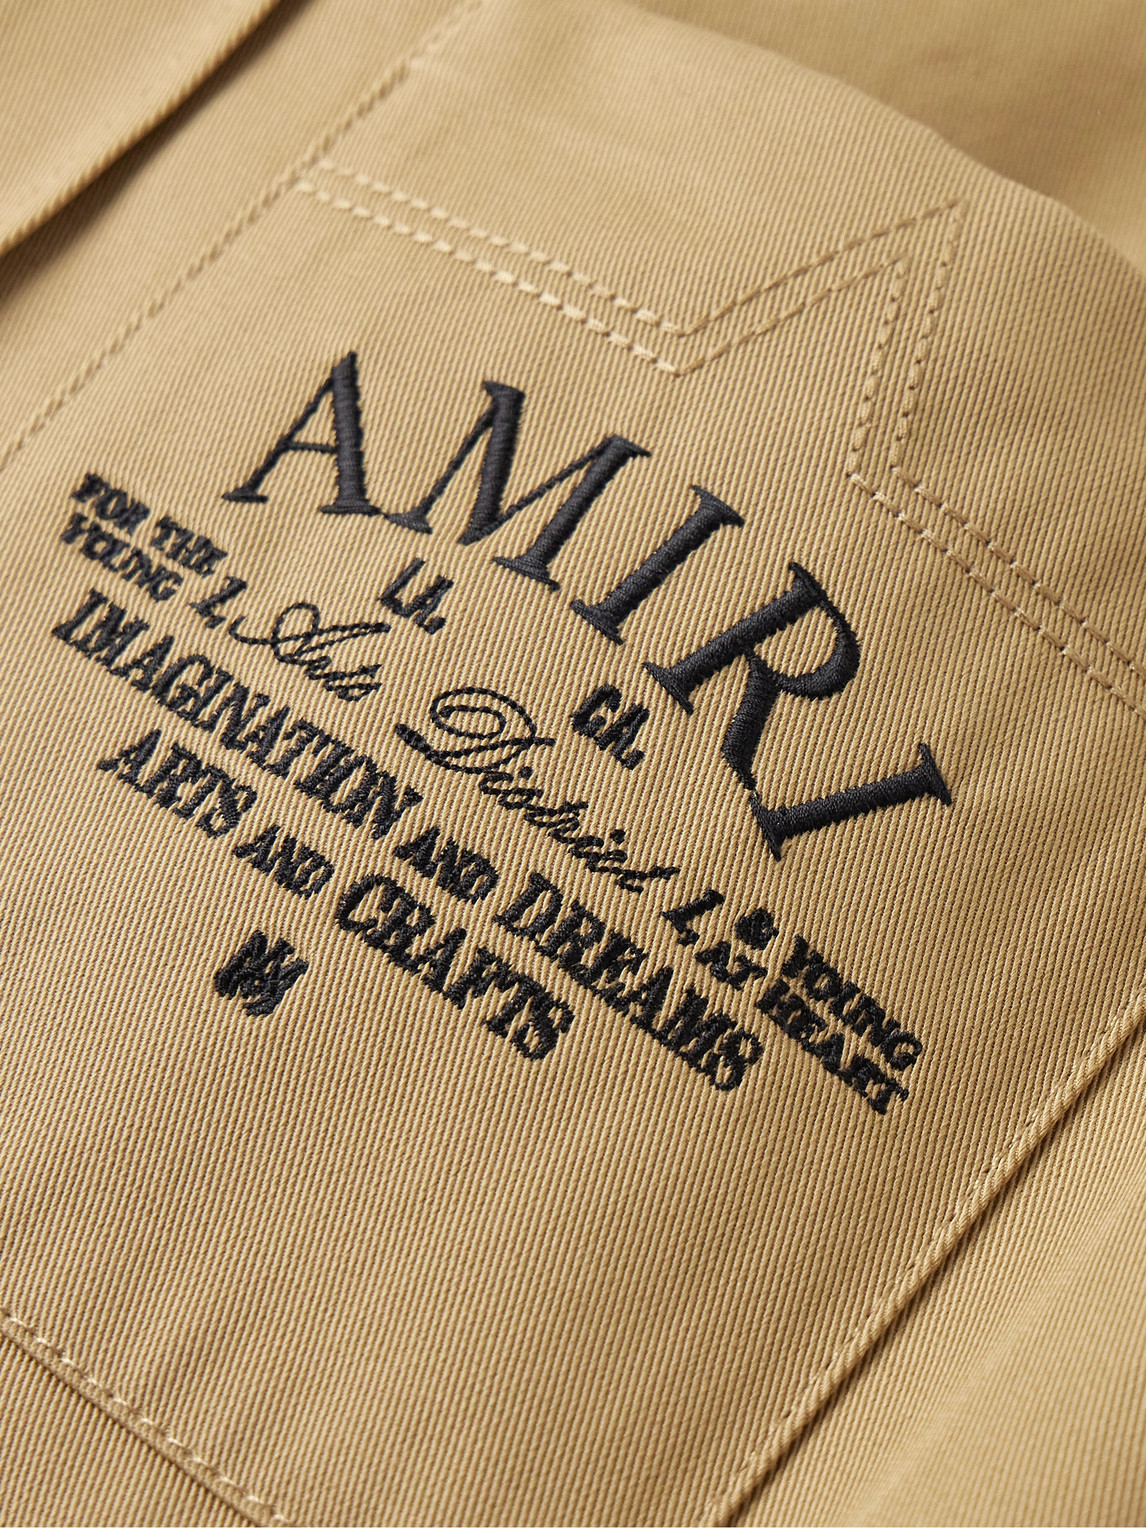 Shop Amiri Arts District Logo-embroidered Cotton-drill Shirt In Brown